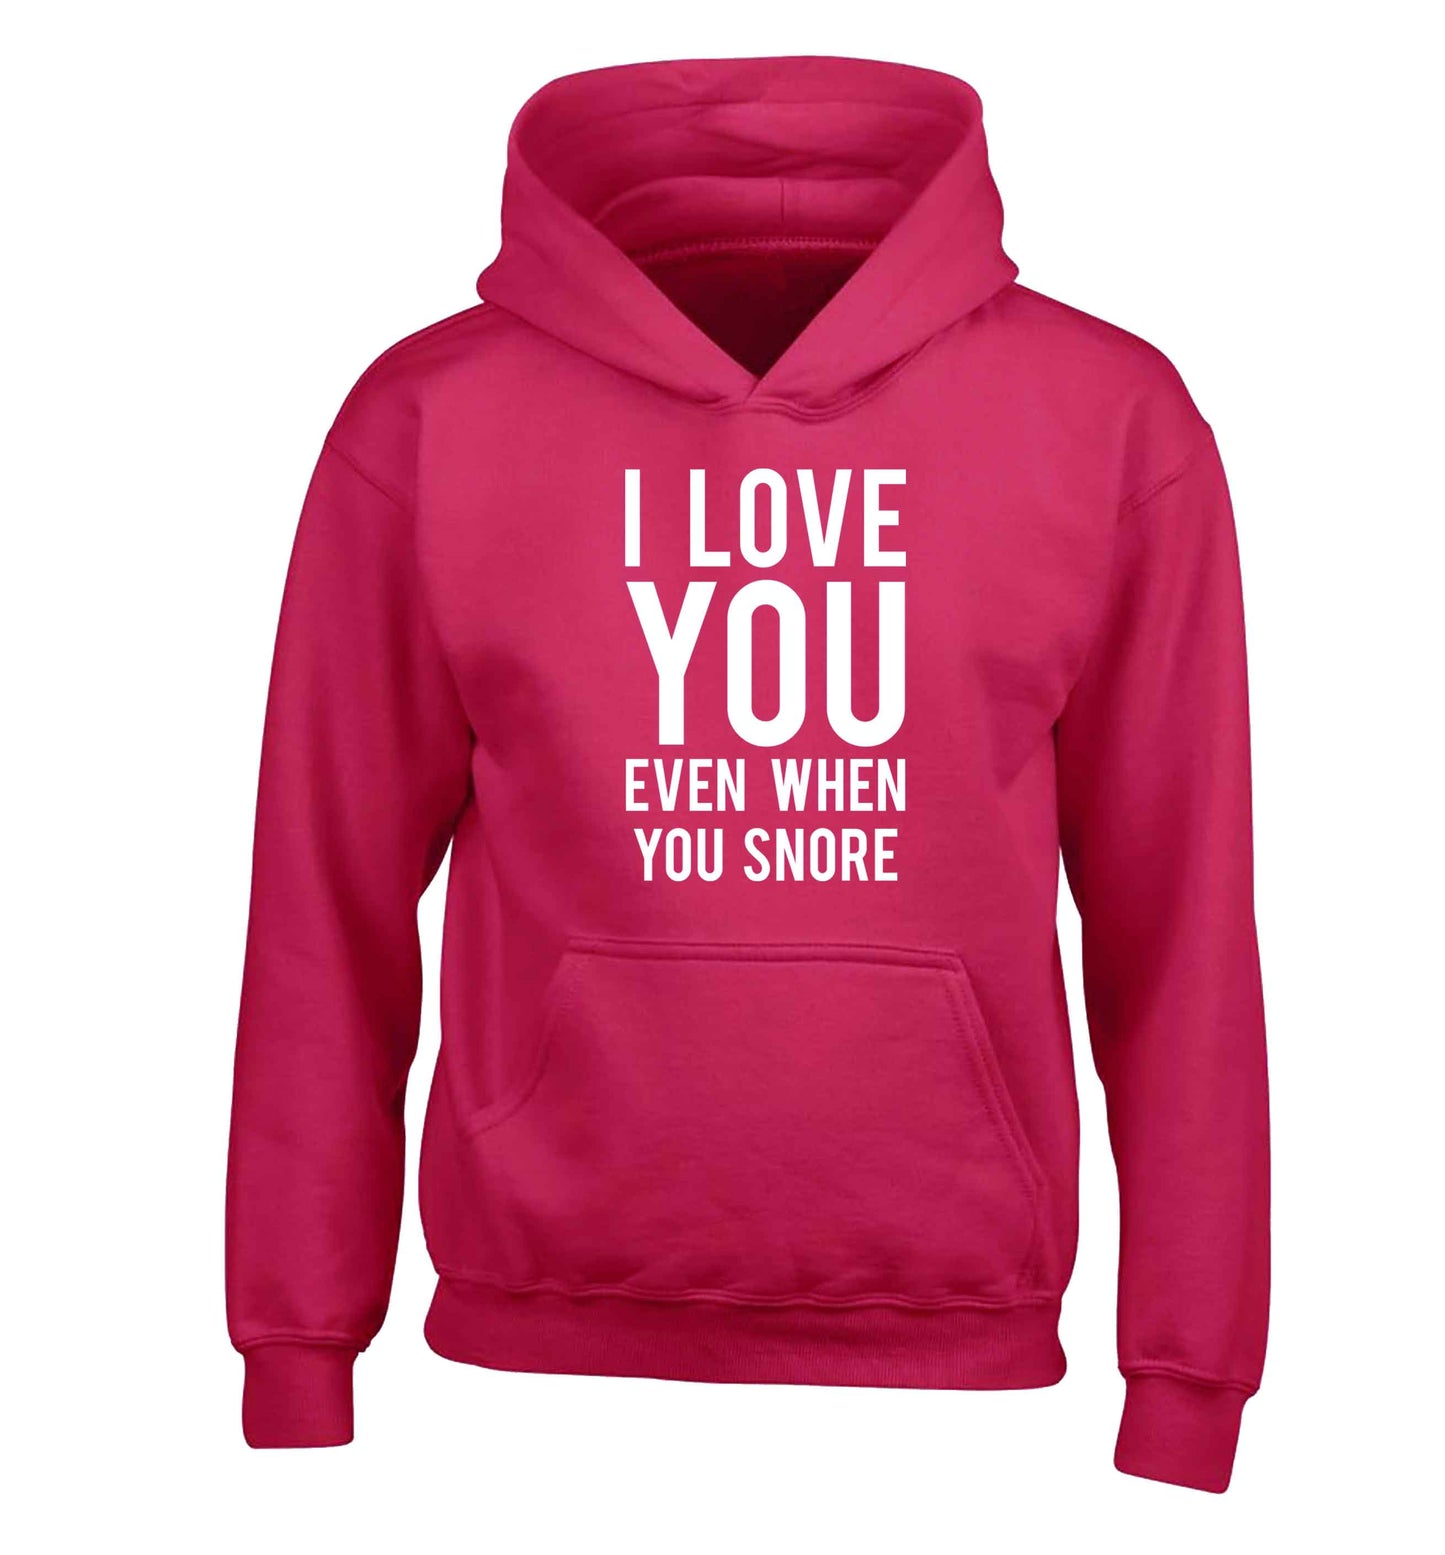 I love you even when you snore children's pink hoodie 12-13 Years